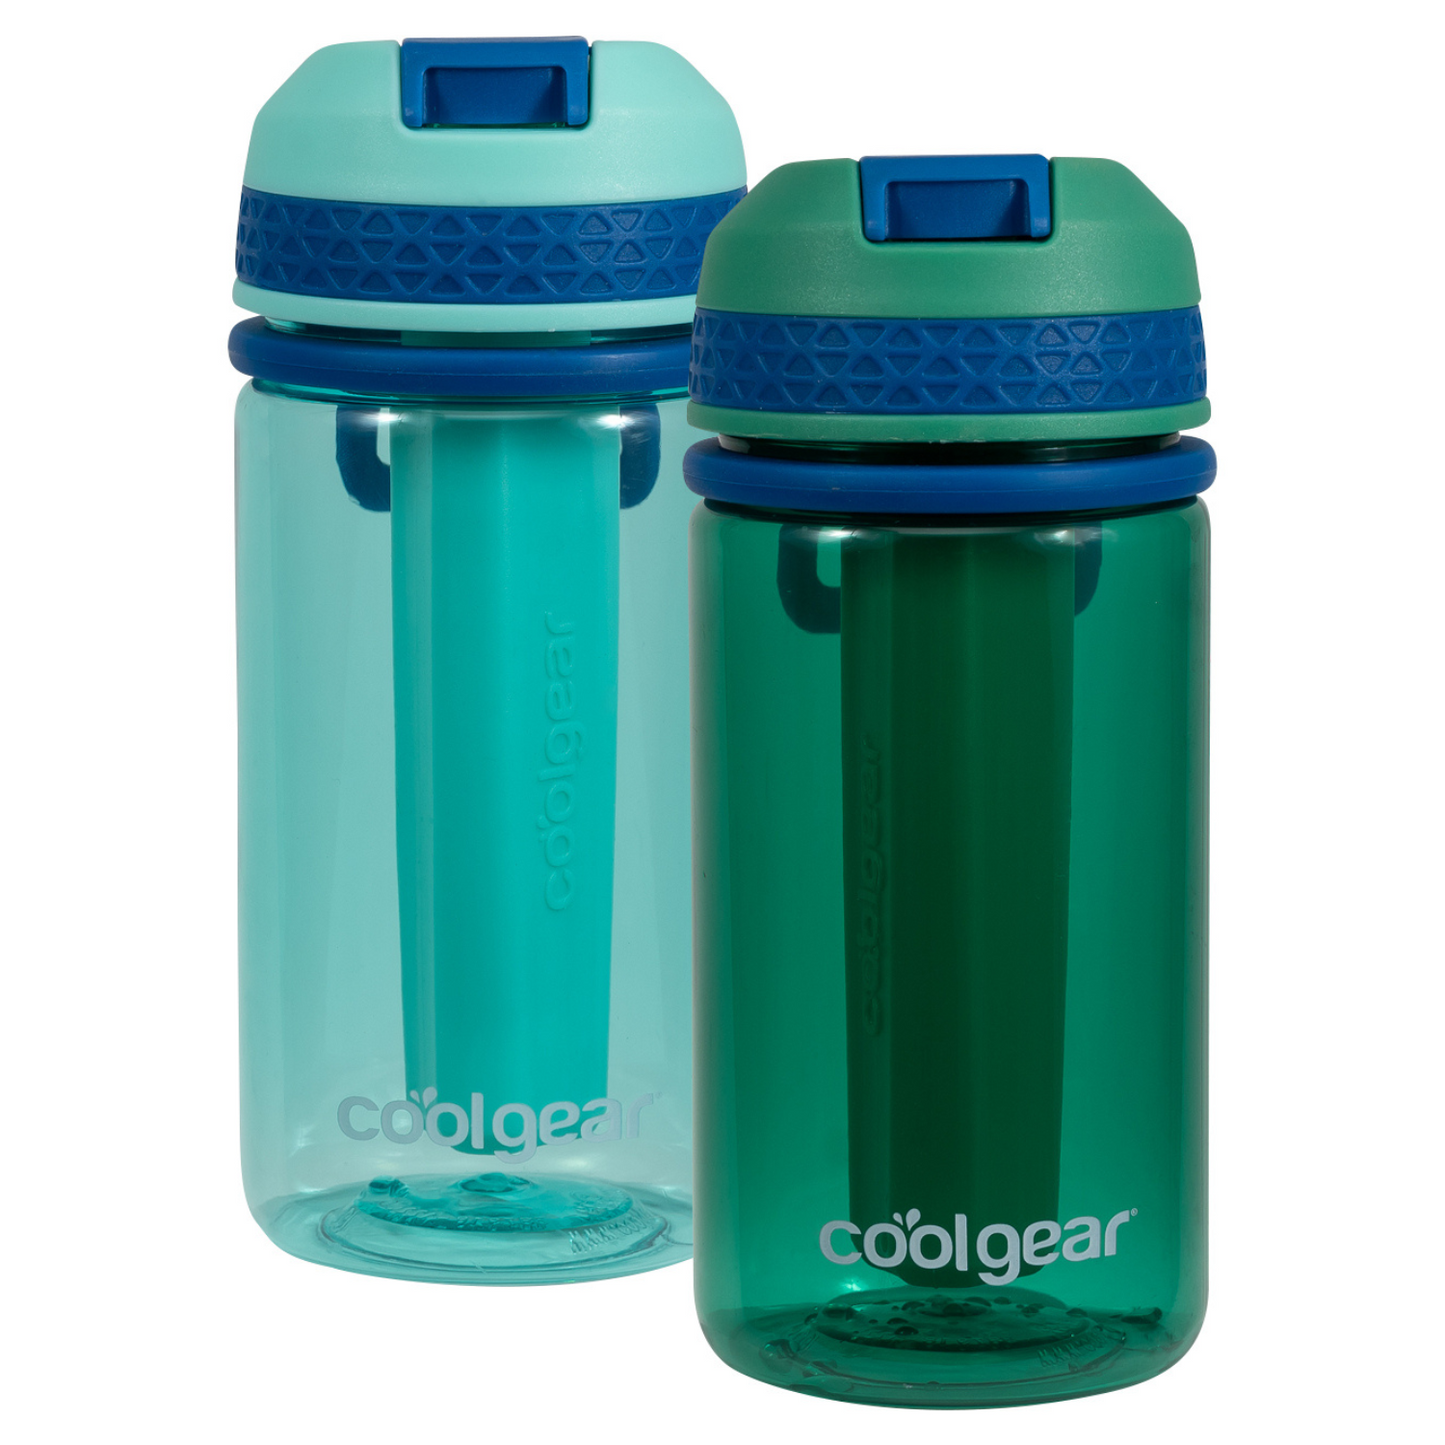 Cool Gear 4-Pack 18 oz System Leakproof Water Bottle, Textured Silicon